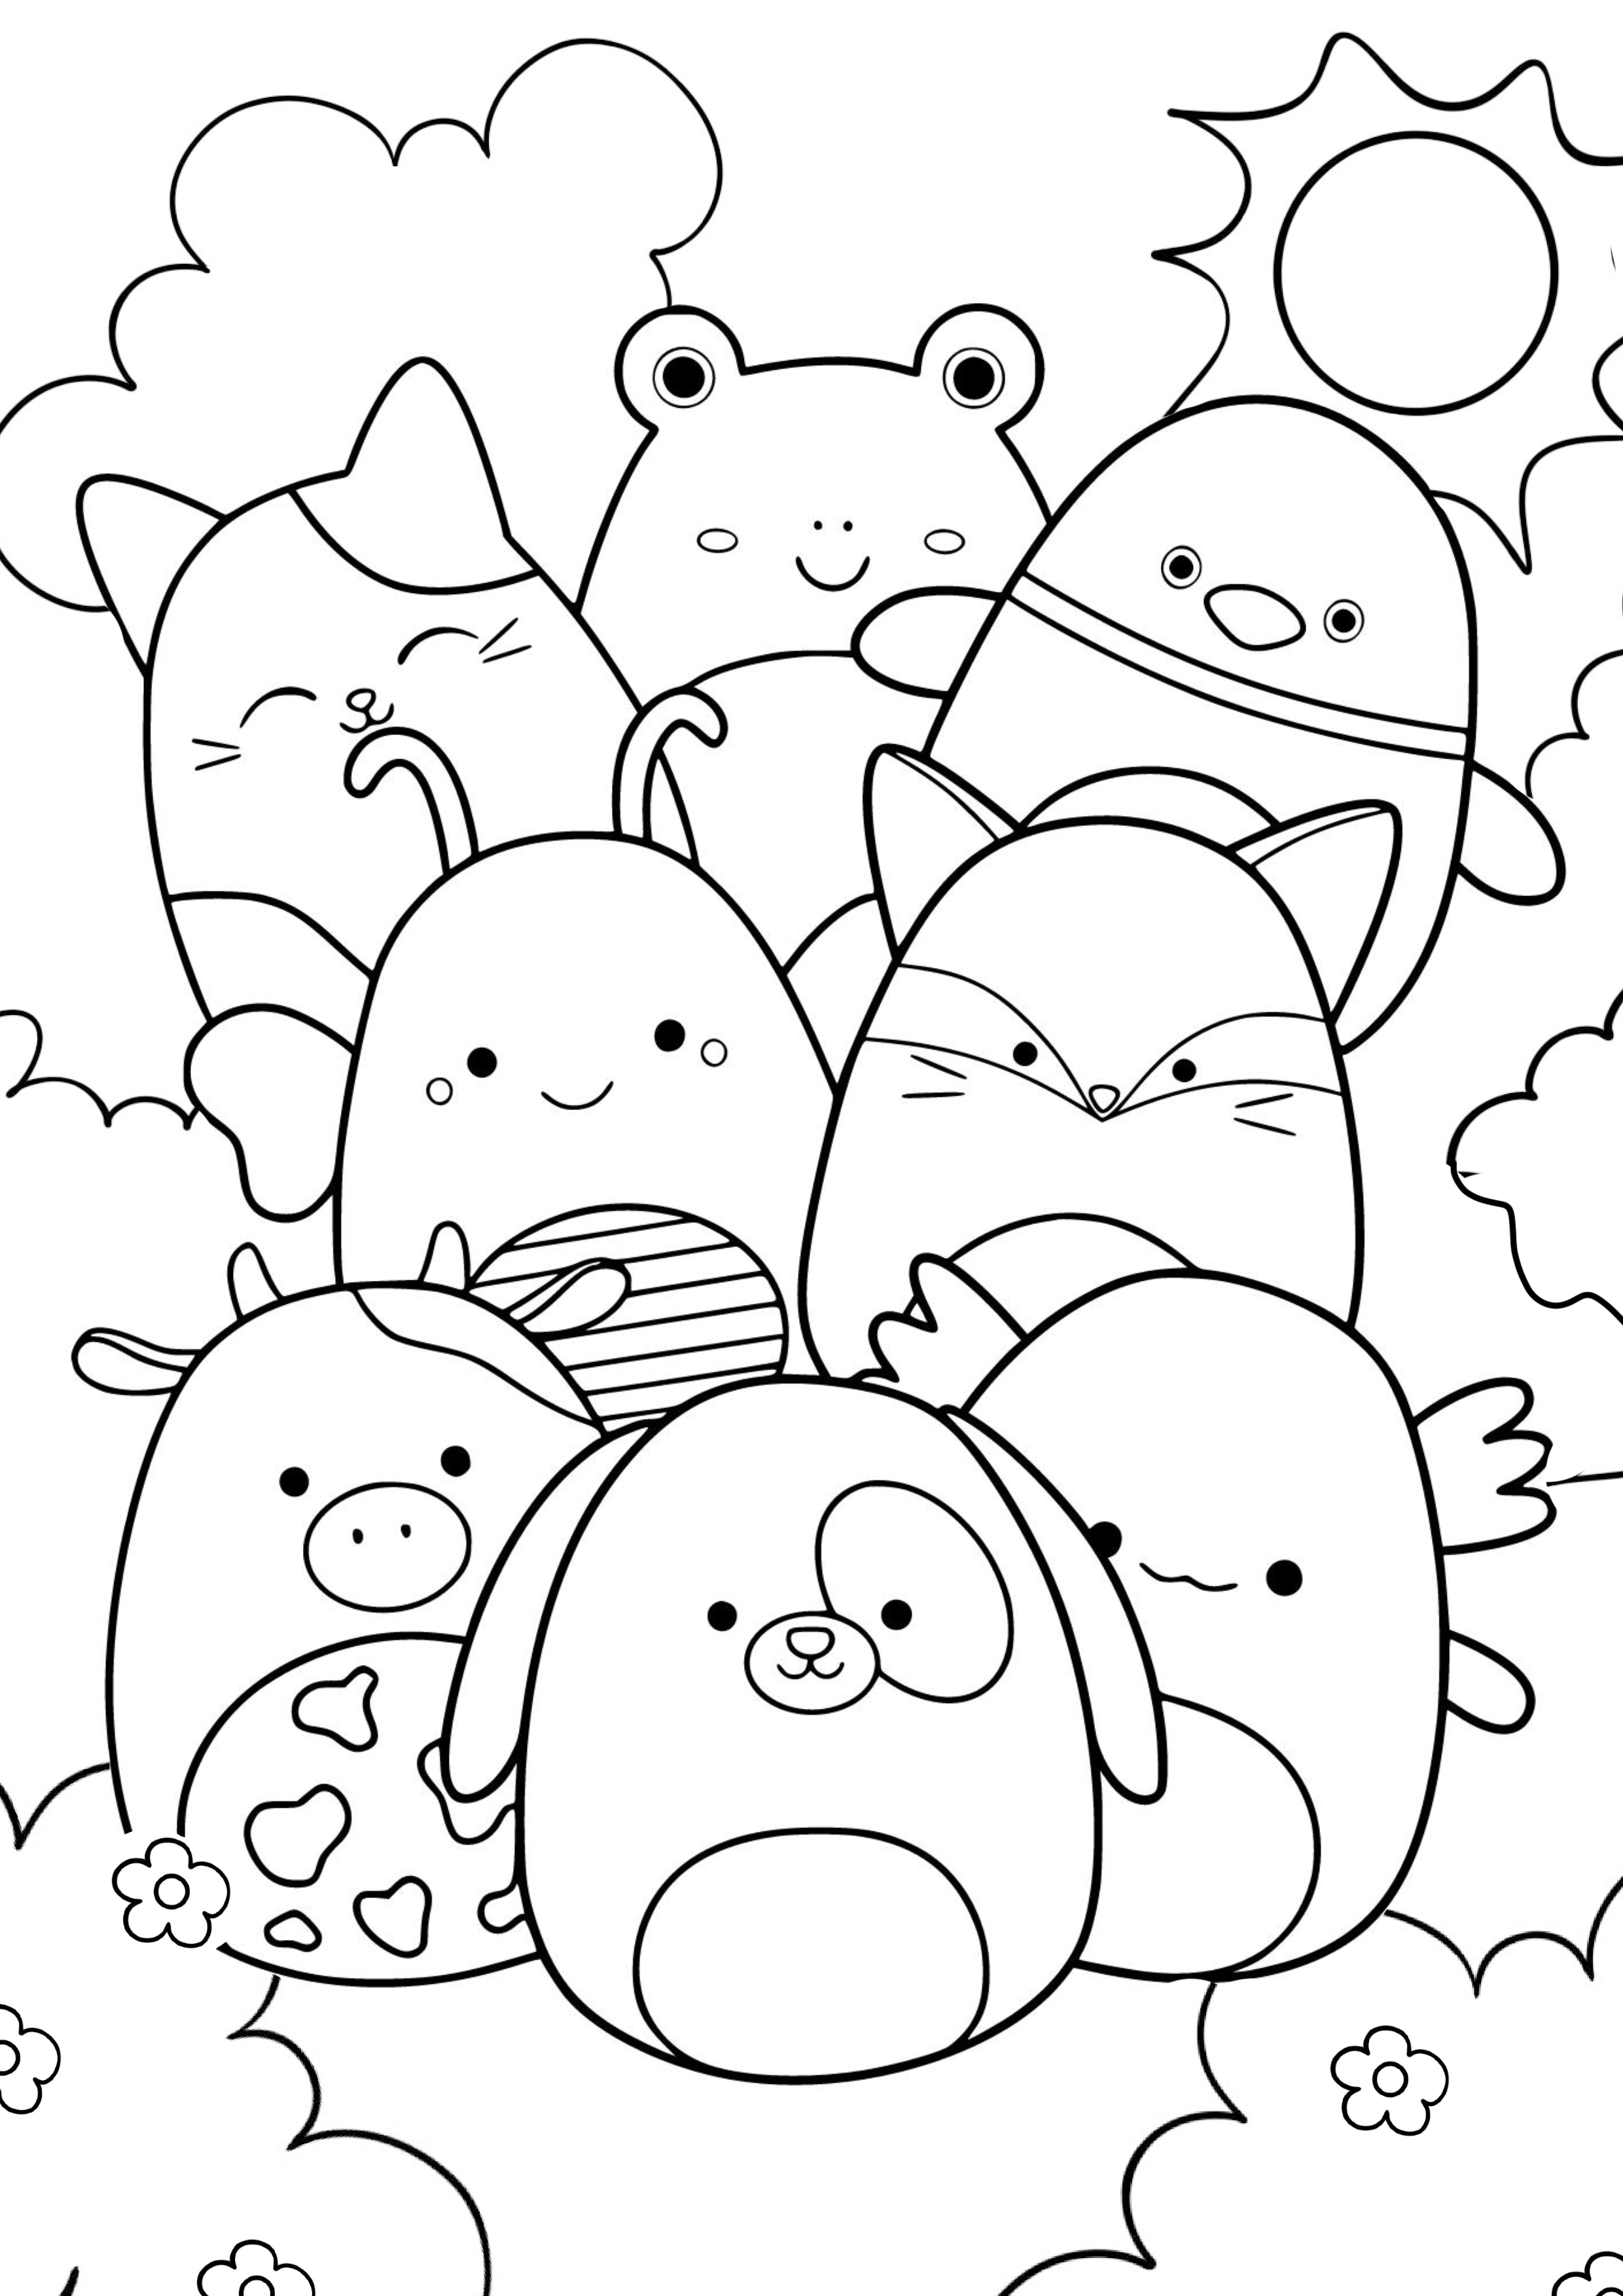 Squishmallow Coloring Pages: 42 Adorable Printables